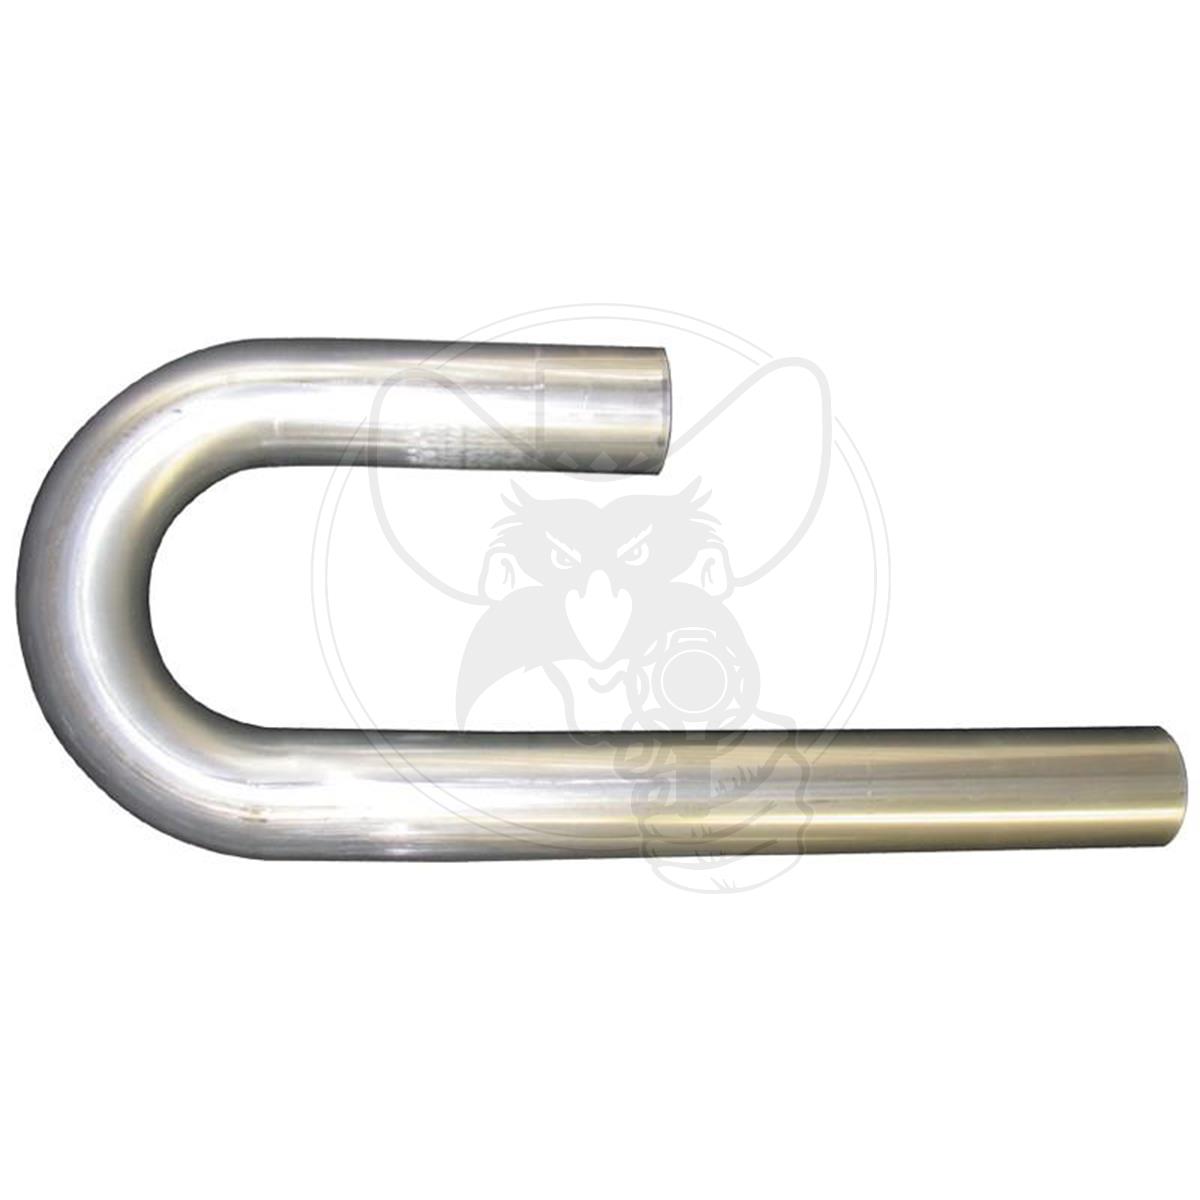 AEROFLOW 180° Stainless J-Bend Tubing 2-1/4" OD WITH 6" & 12" LEGS